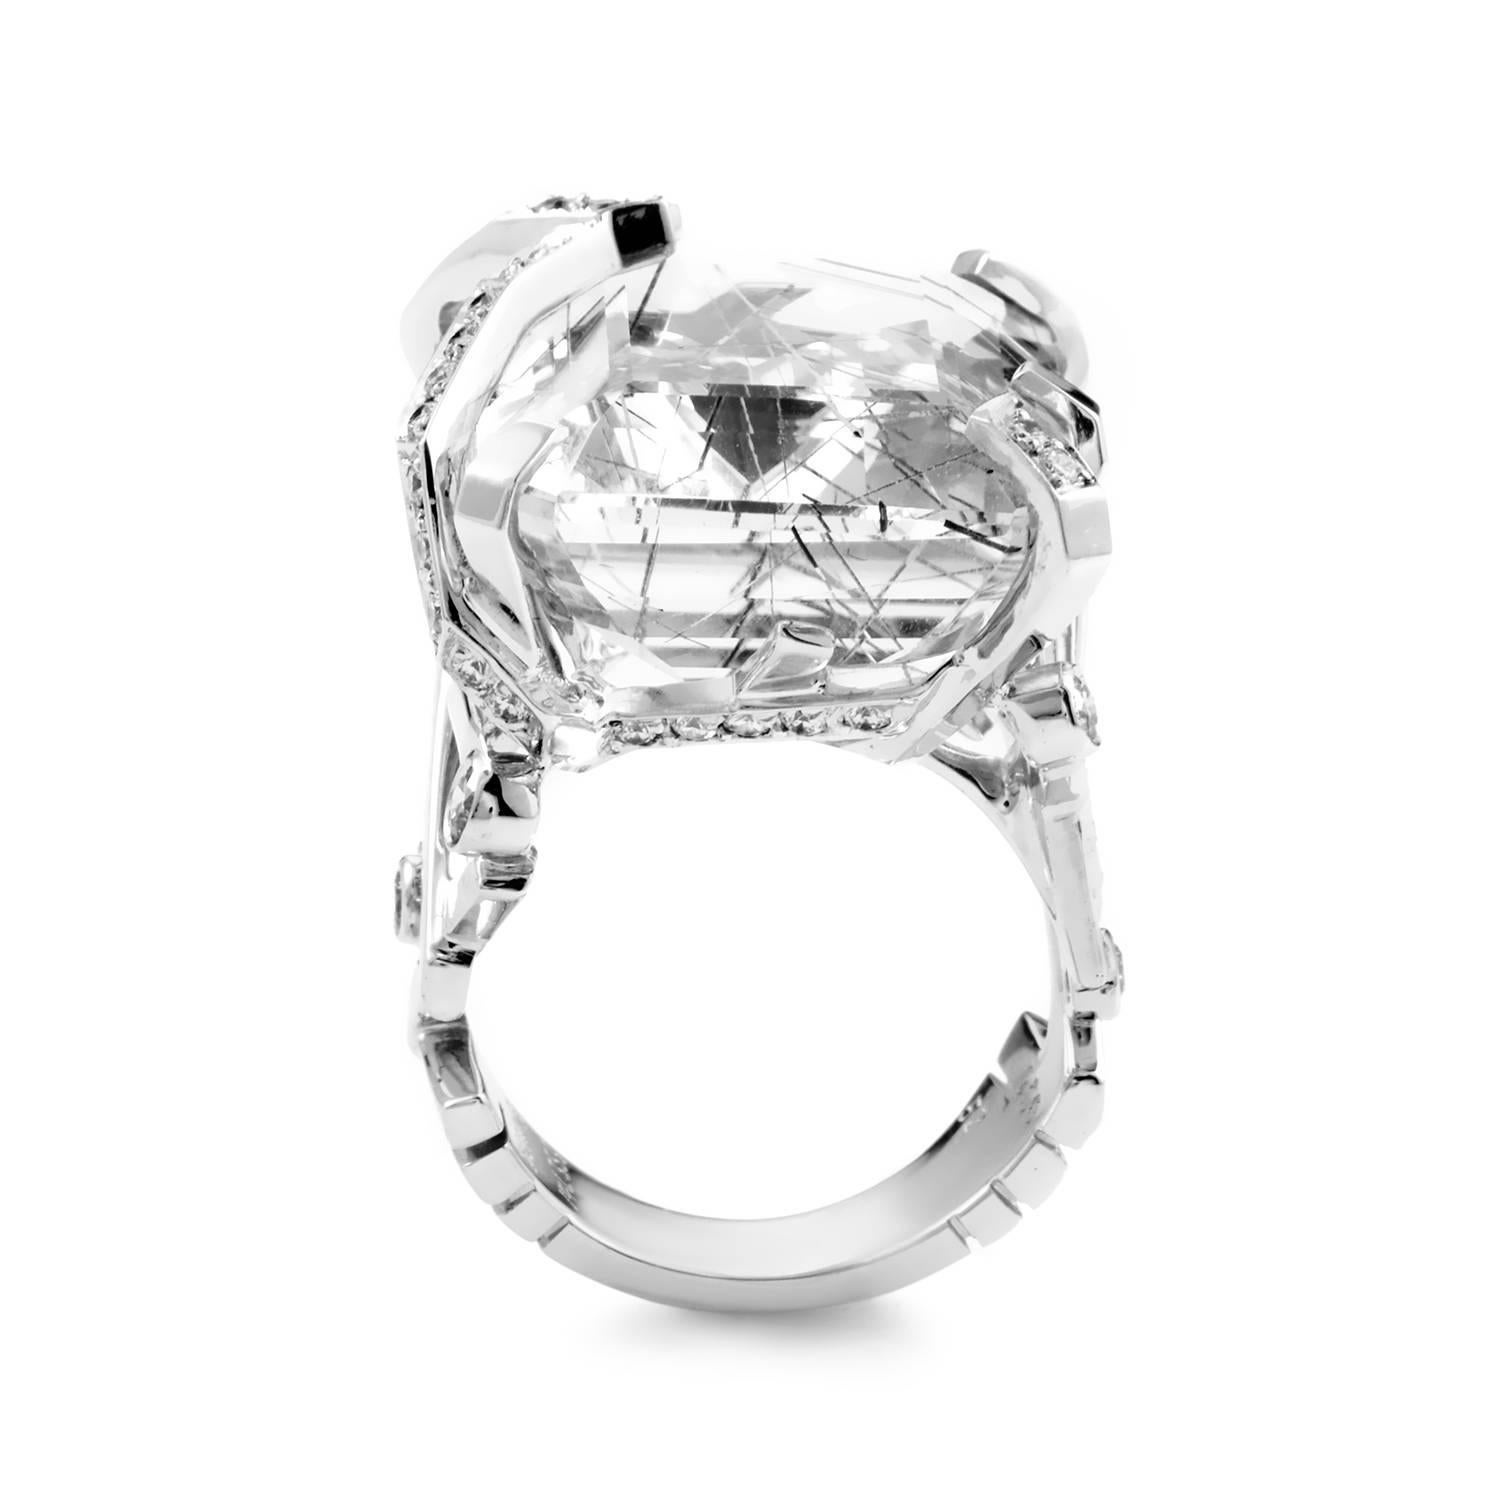 The pristine white form of this Chanel ring is given a bold and edgy touch to make it stand out in a crowd. The ring is made of 18K white gold and boasts uniquely designed shanks set with diamonds. Lastly, the ring holds a faceted white rutilated